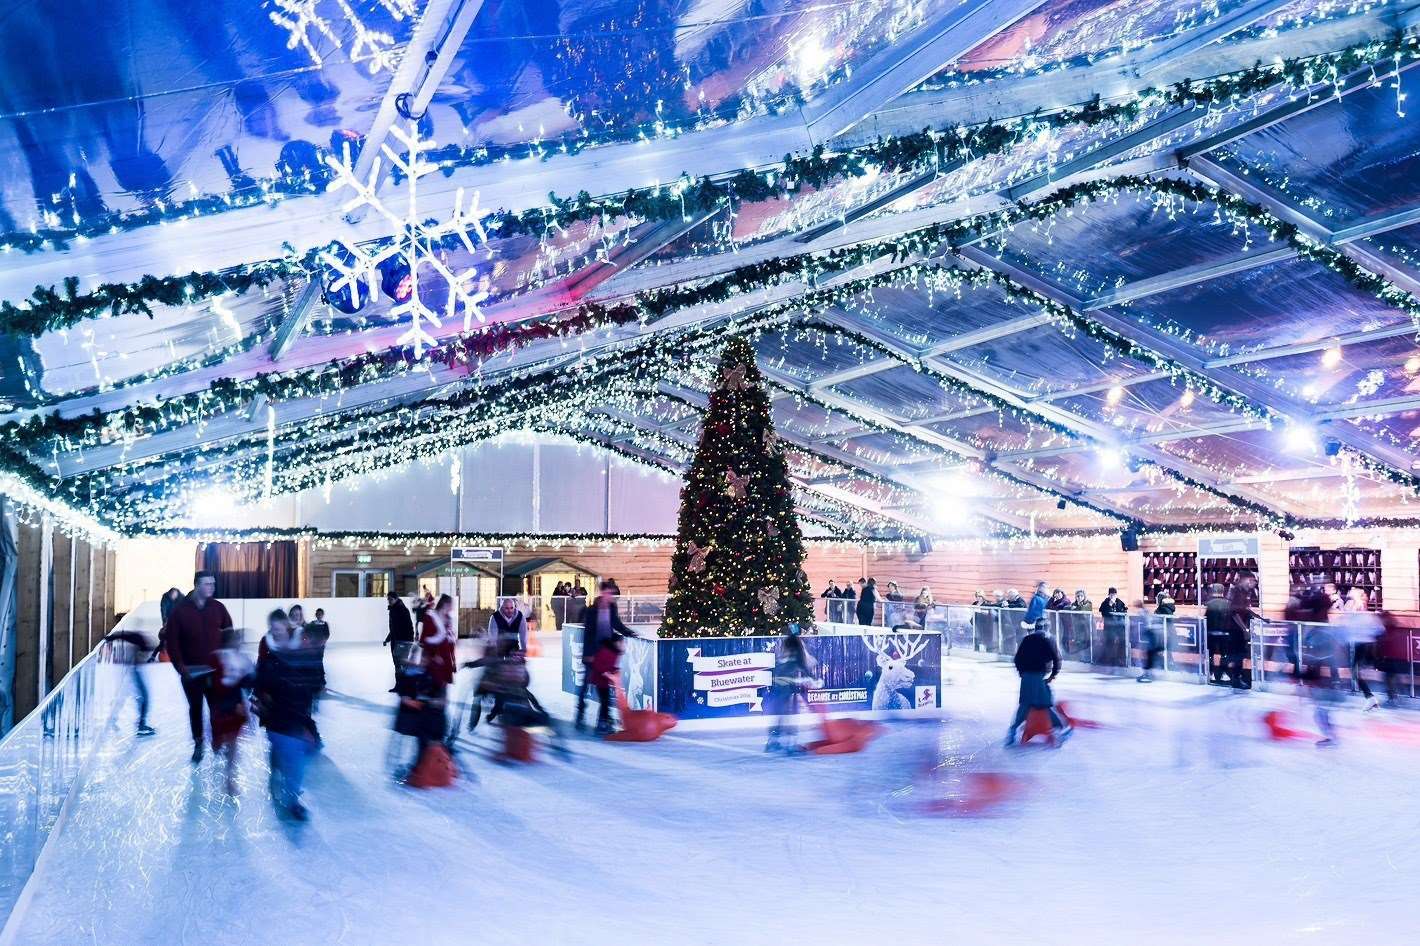 There is an ice rink at Bluewater